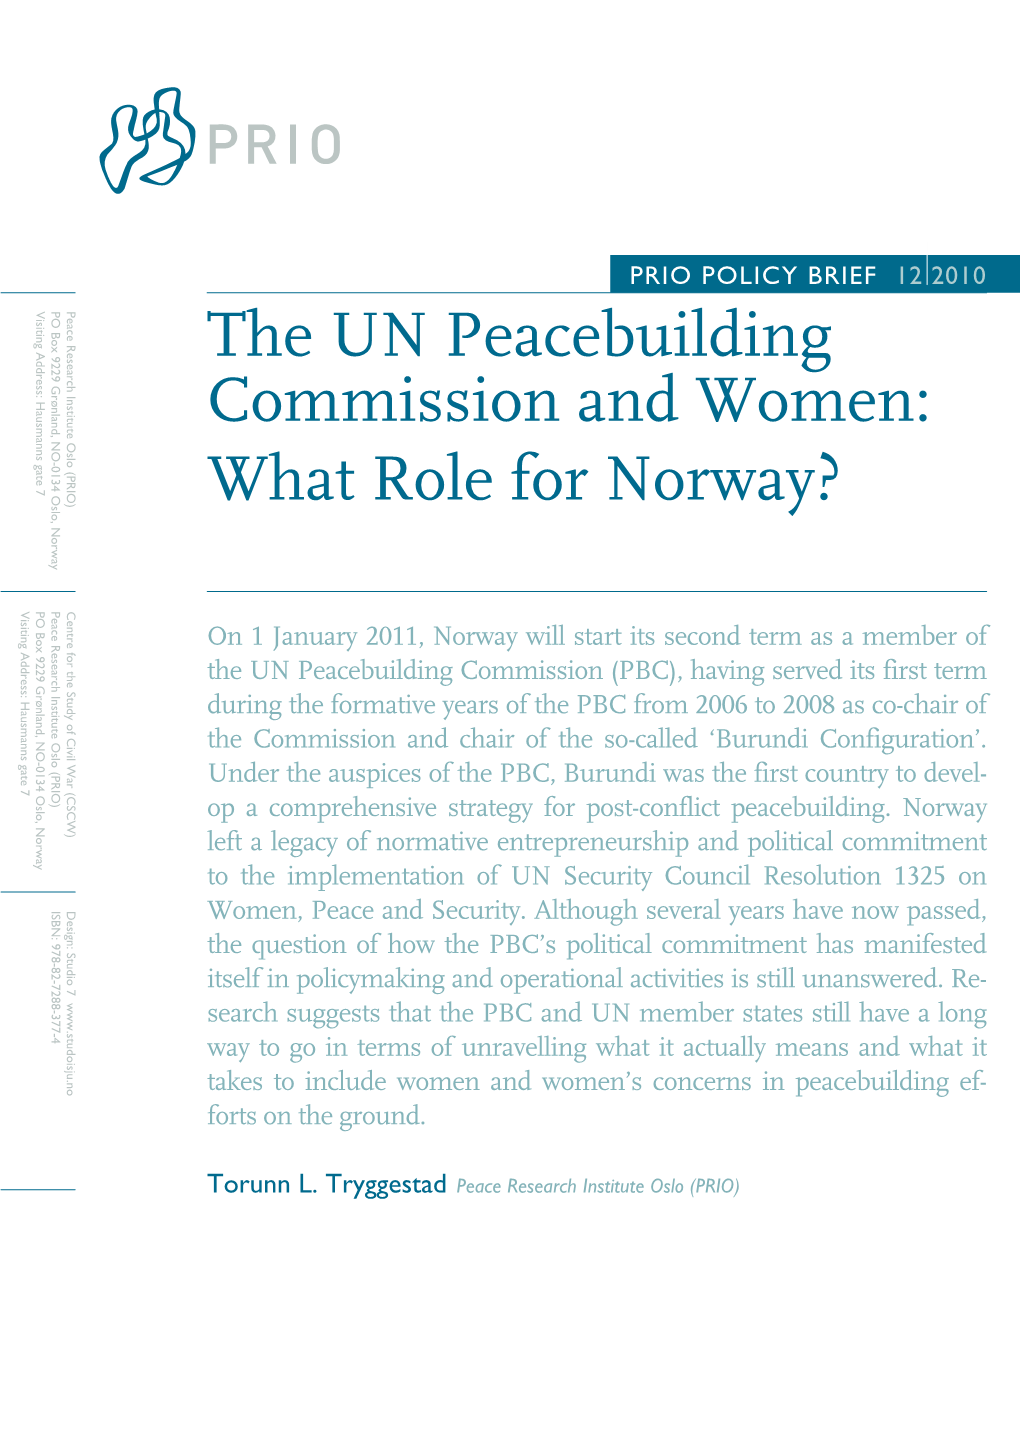 The UN Peacebuilding Commission and Women: What Role for Norway?